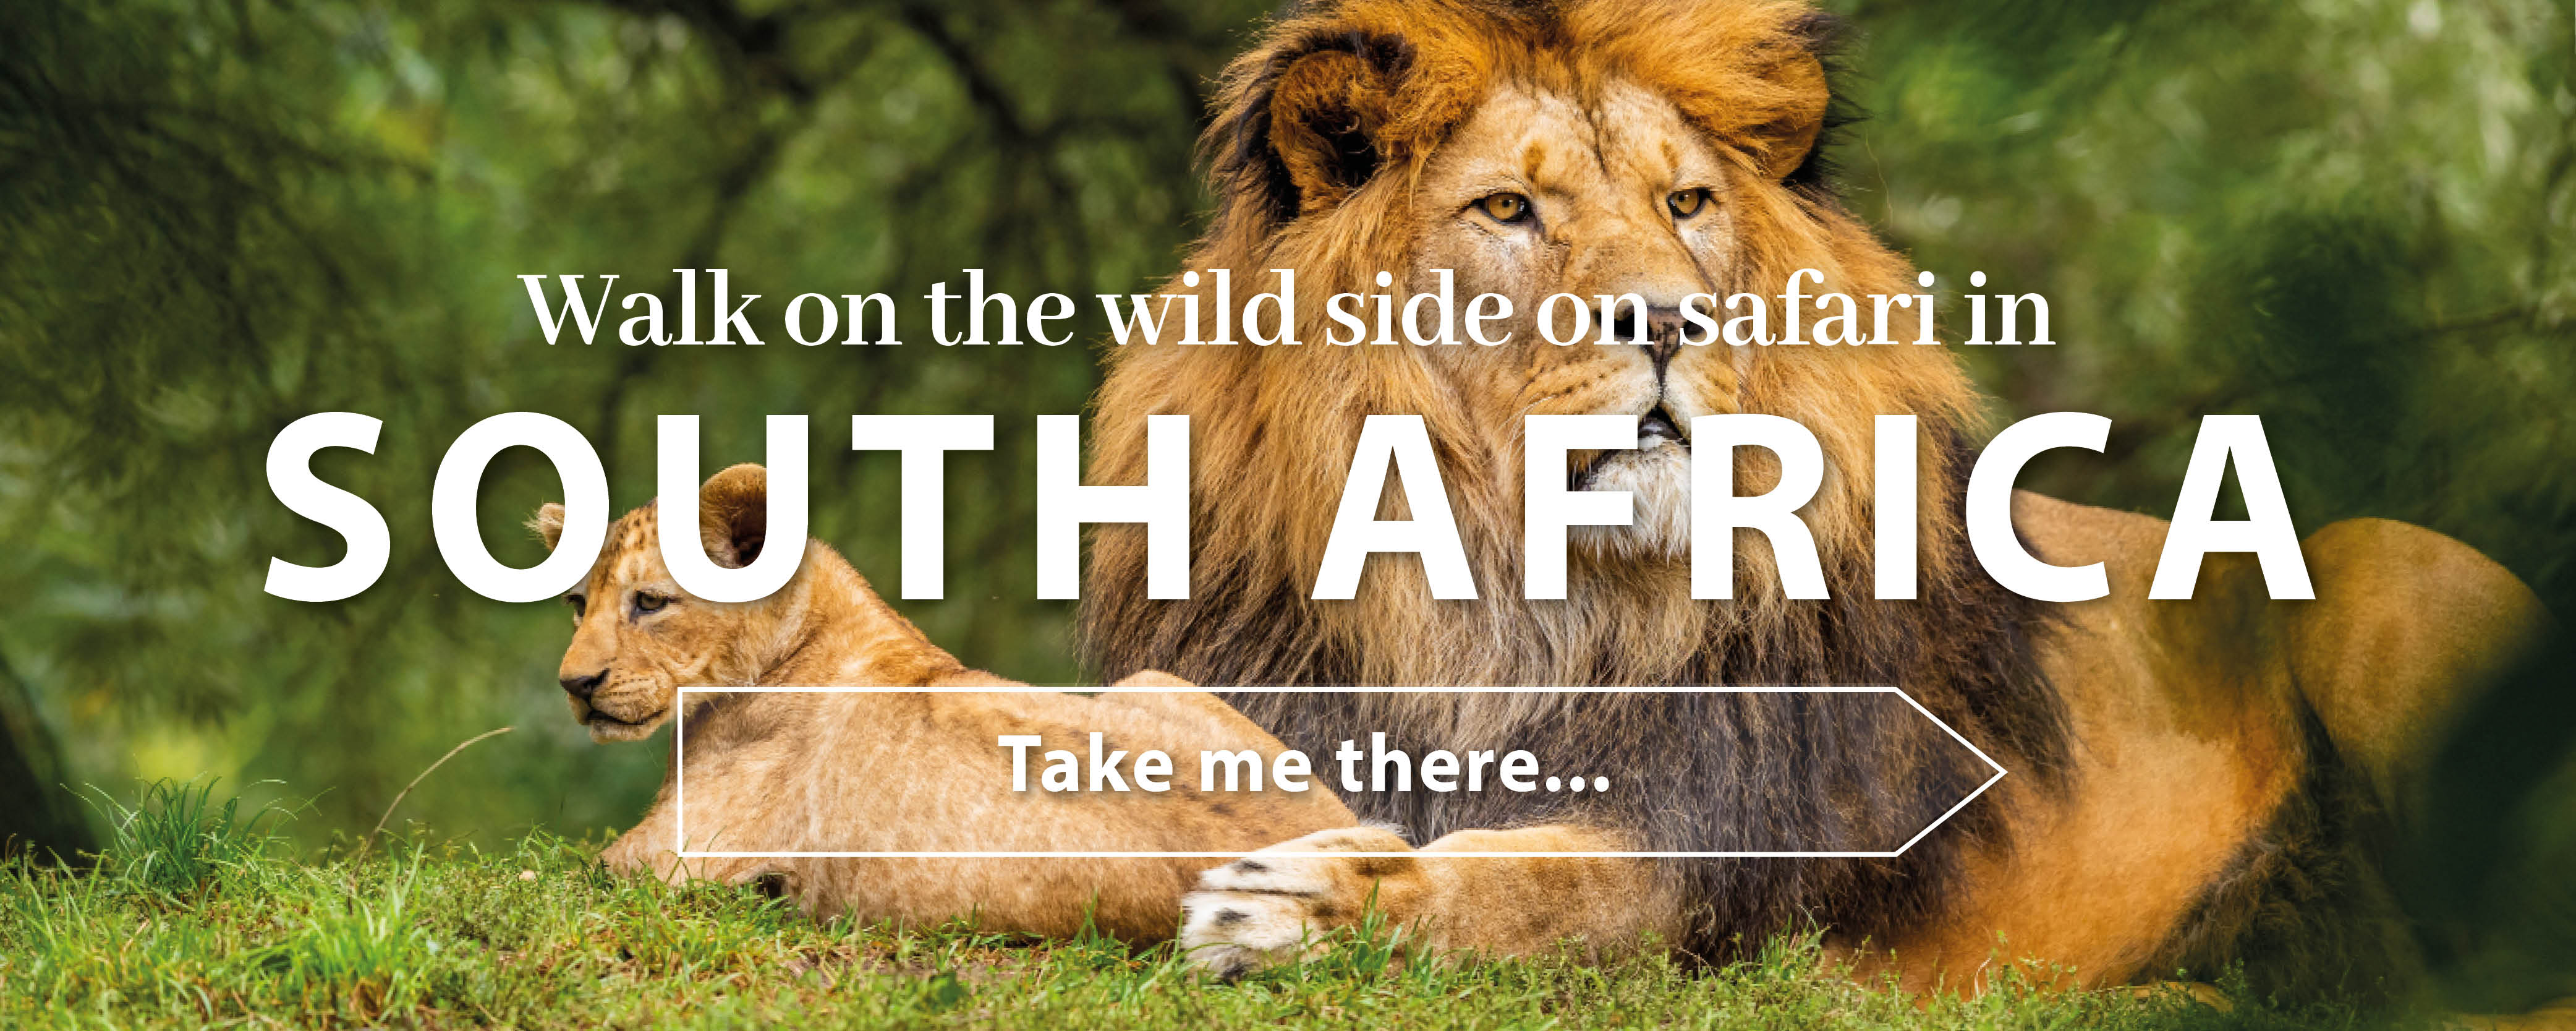 test free travel destinations South Africa